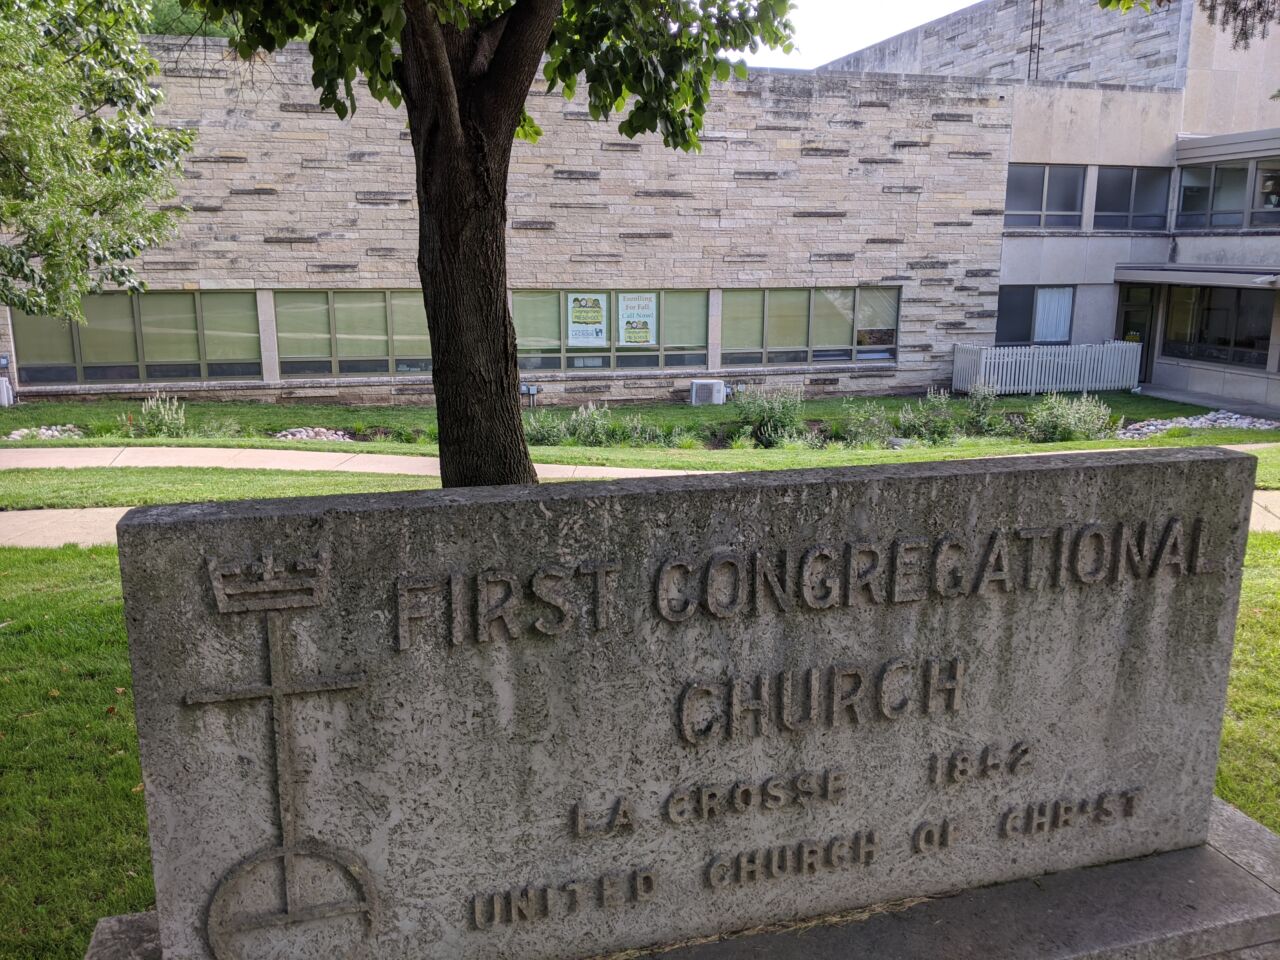 sign for first congregational church